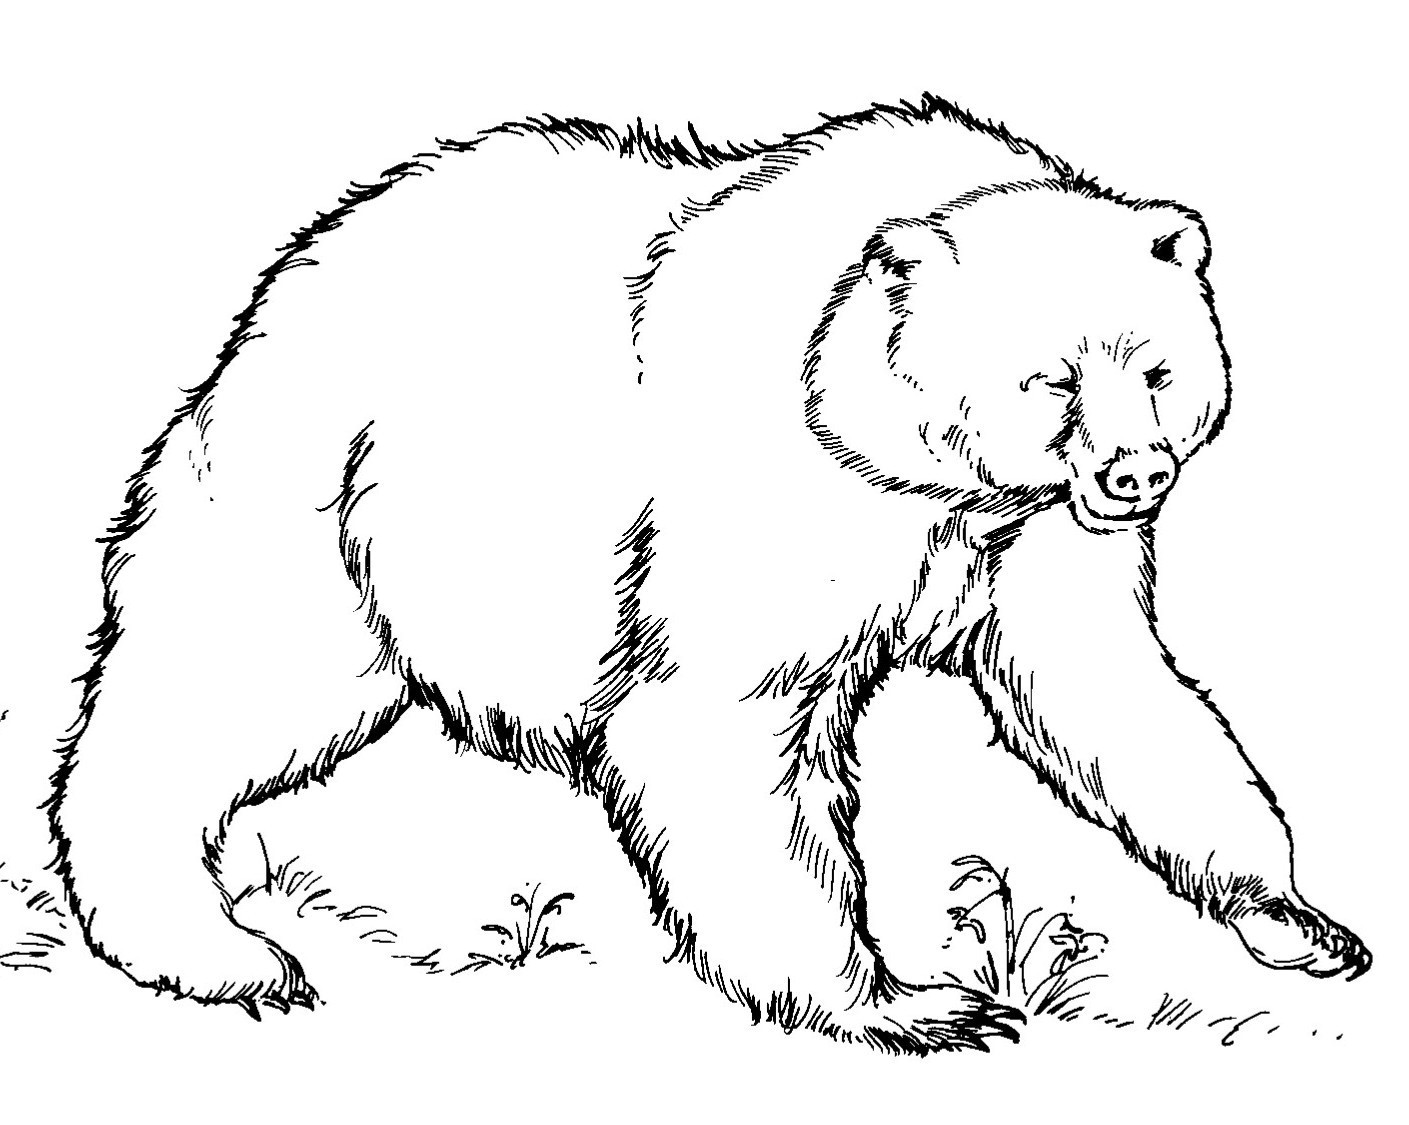 Bear Coloring Pages
 Free Printable Bear Coloring Pages For Kids